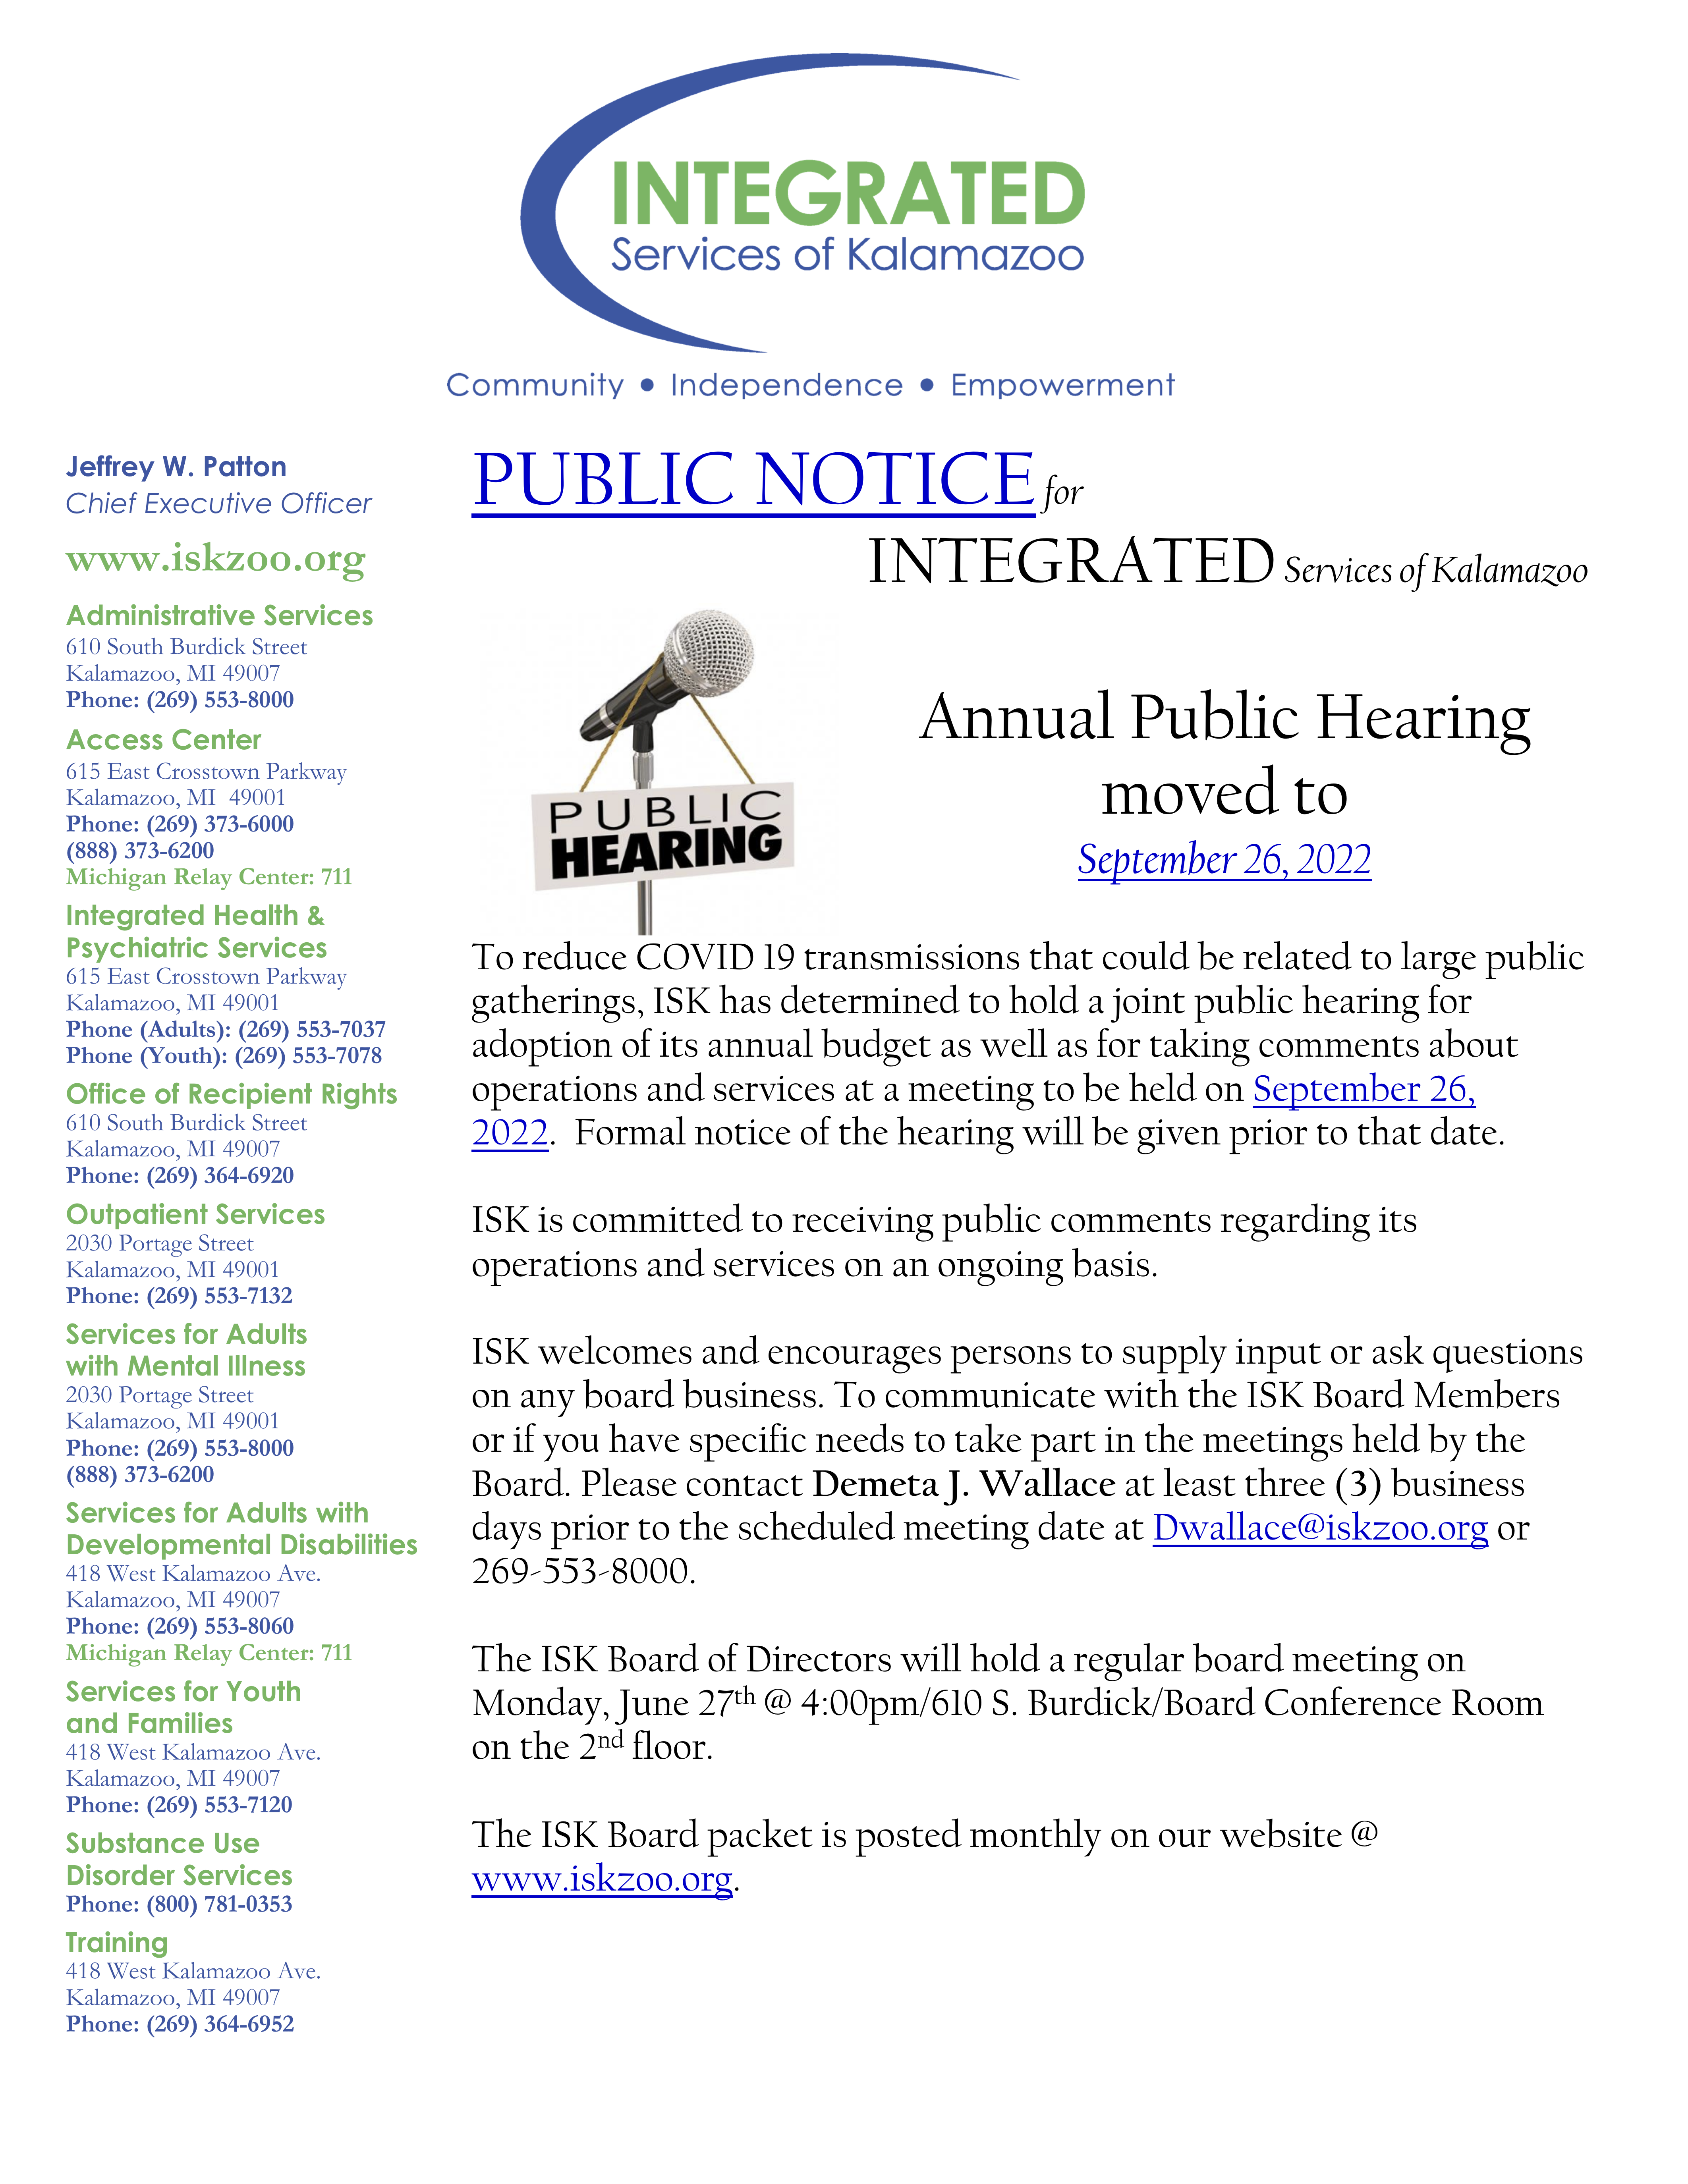 ISK's Annual Public Hearing moved to Sept. 26, 2022 - Integrated Services  of Kalamazoo